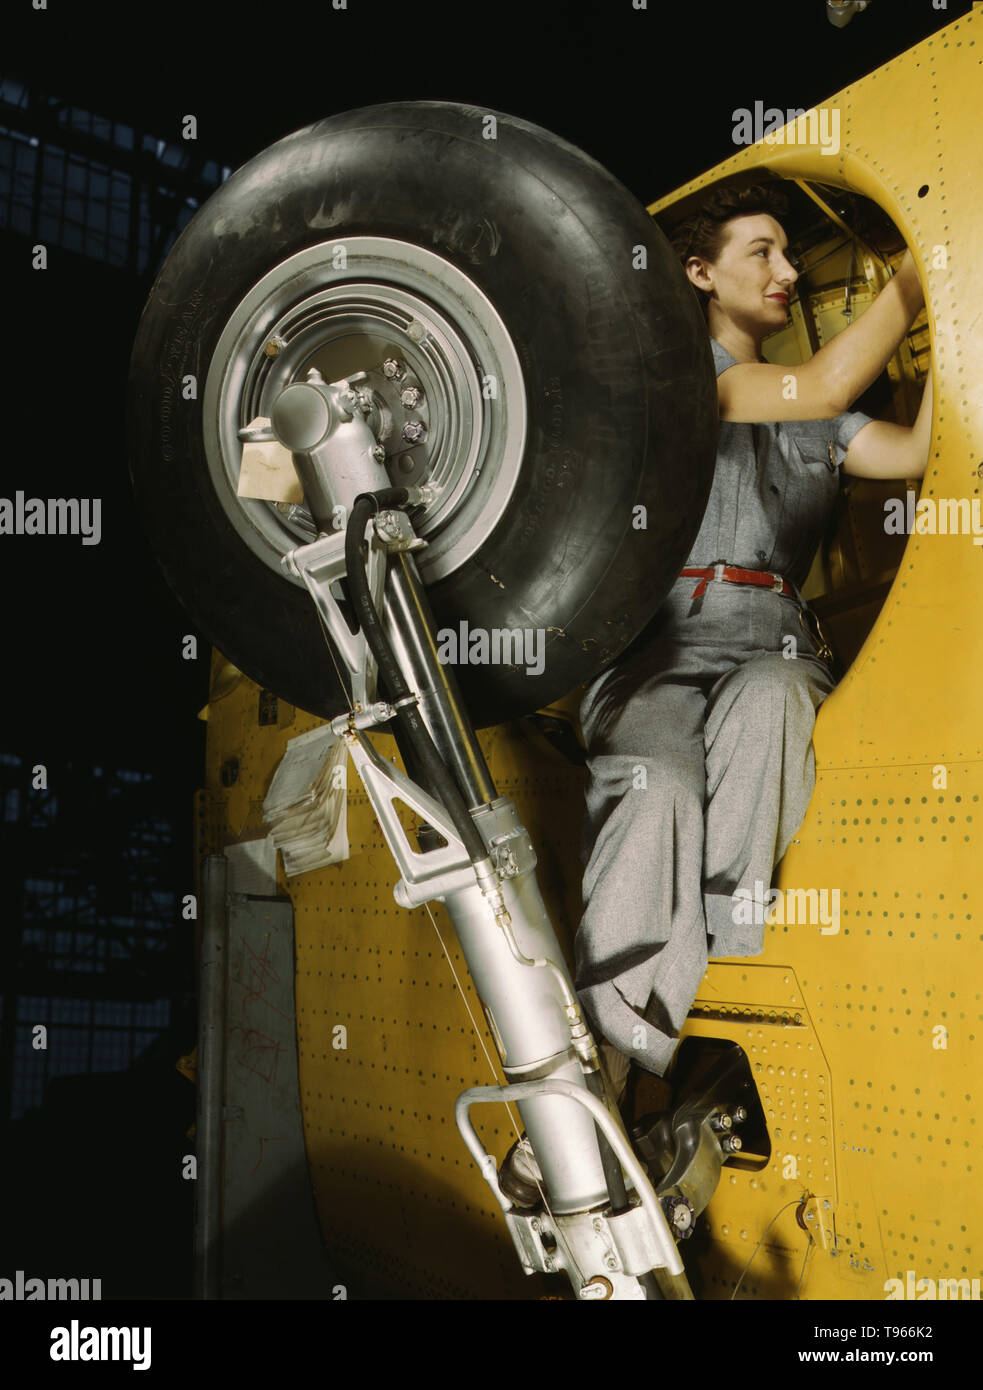 This woman worker at the Vultee-Nashville is shown making final adjustments in the wheel well of an inner wing before the installation of the landing gear, Nashville, Tenn. This is one of the numerous assembly operations in connection with the mass production of Vultee Vengeance dive bombers. Although the image of 'Rosie the Riveter' reflected the industrial work of welders and riveters, the majority of working women filled non-factory positions in every sector of the economy. Stock Photo